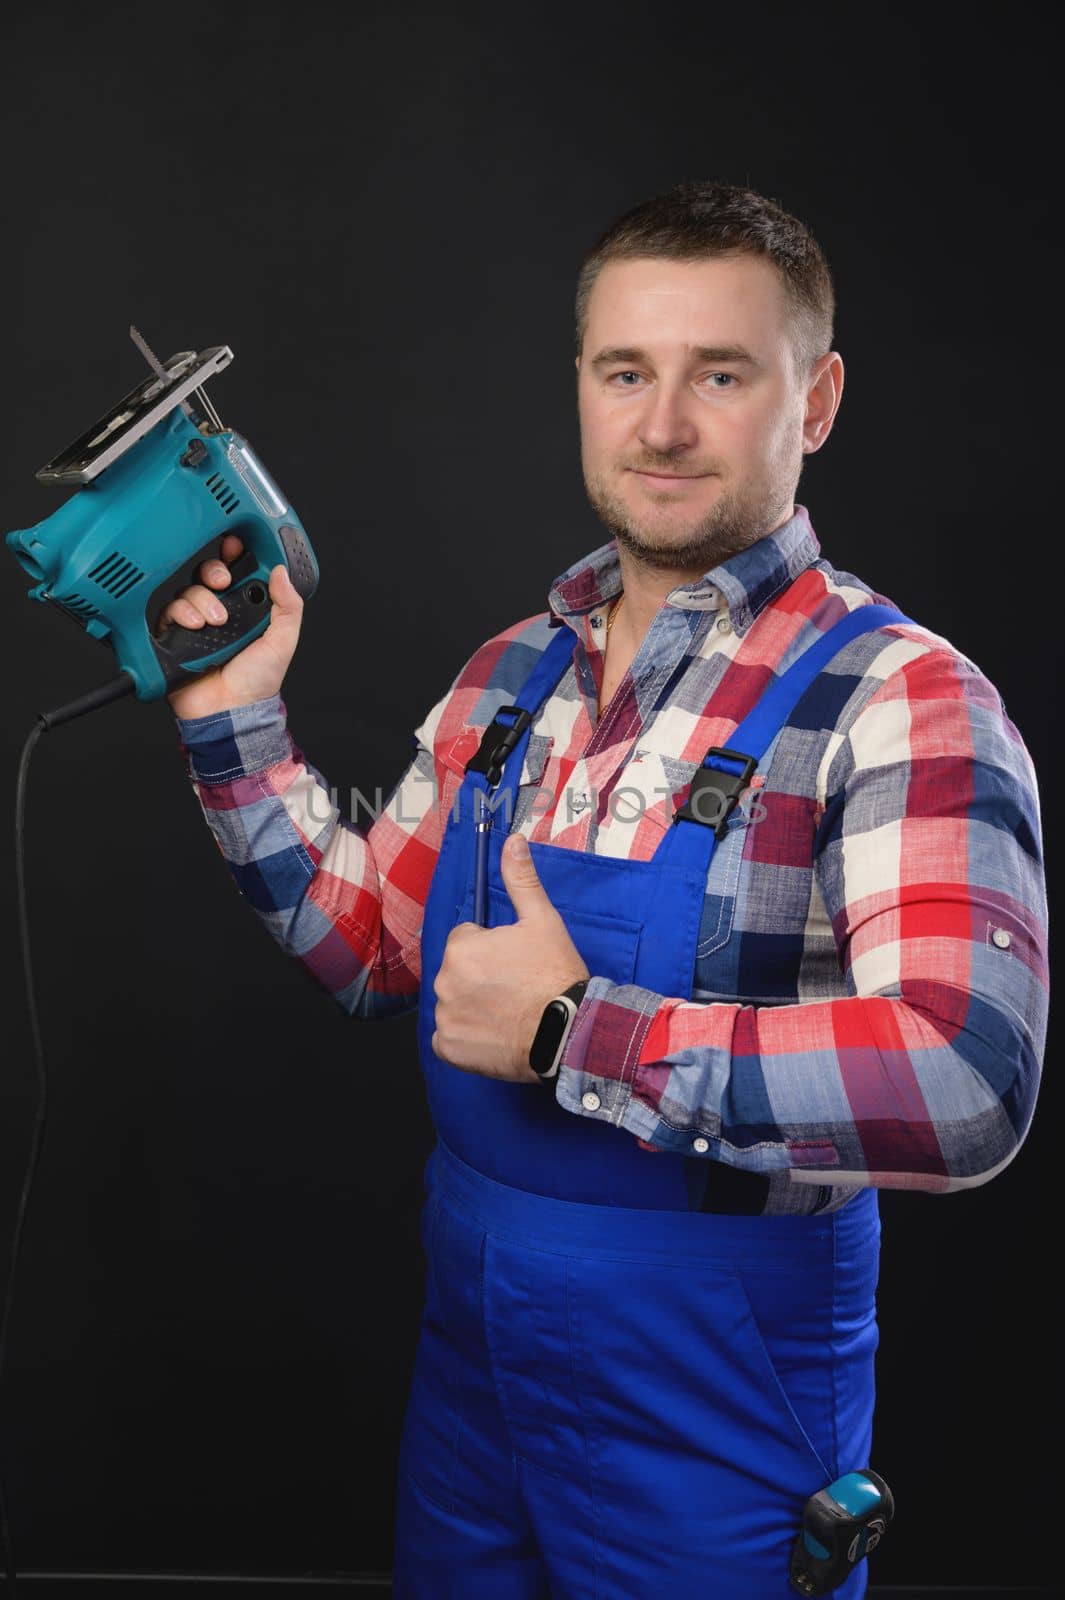 Smiling man in a plaid shirt and overalls holds a jigsaw in his hand on a black background and with the other hand shows a thumbs up gesture by yanik88